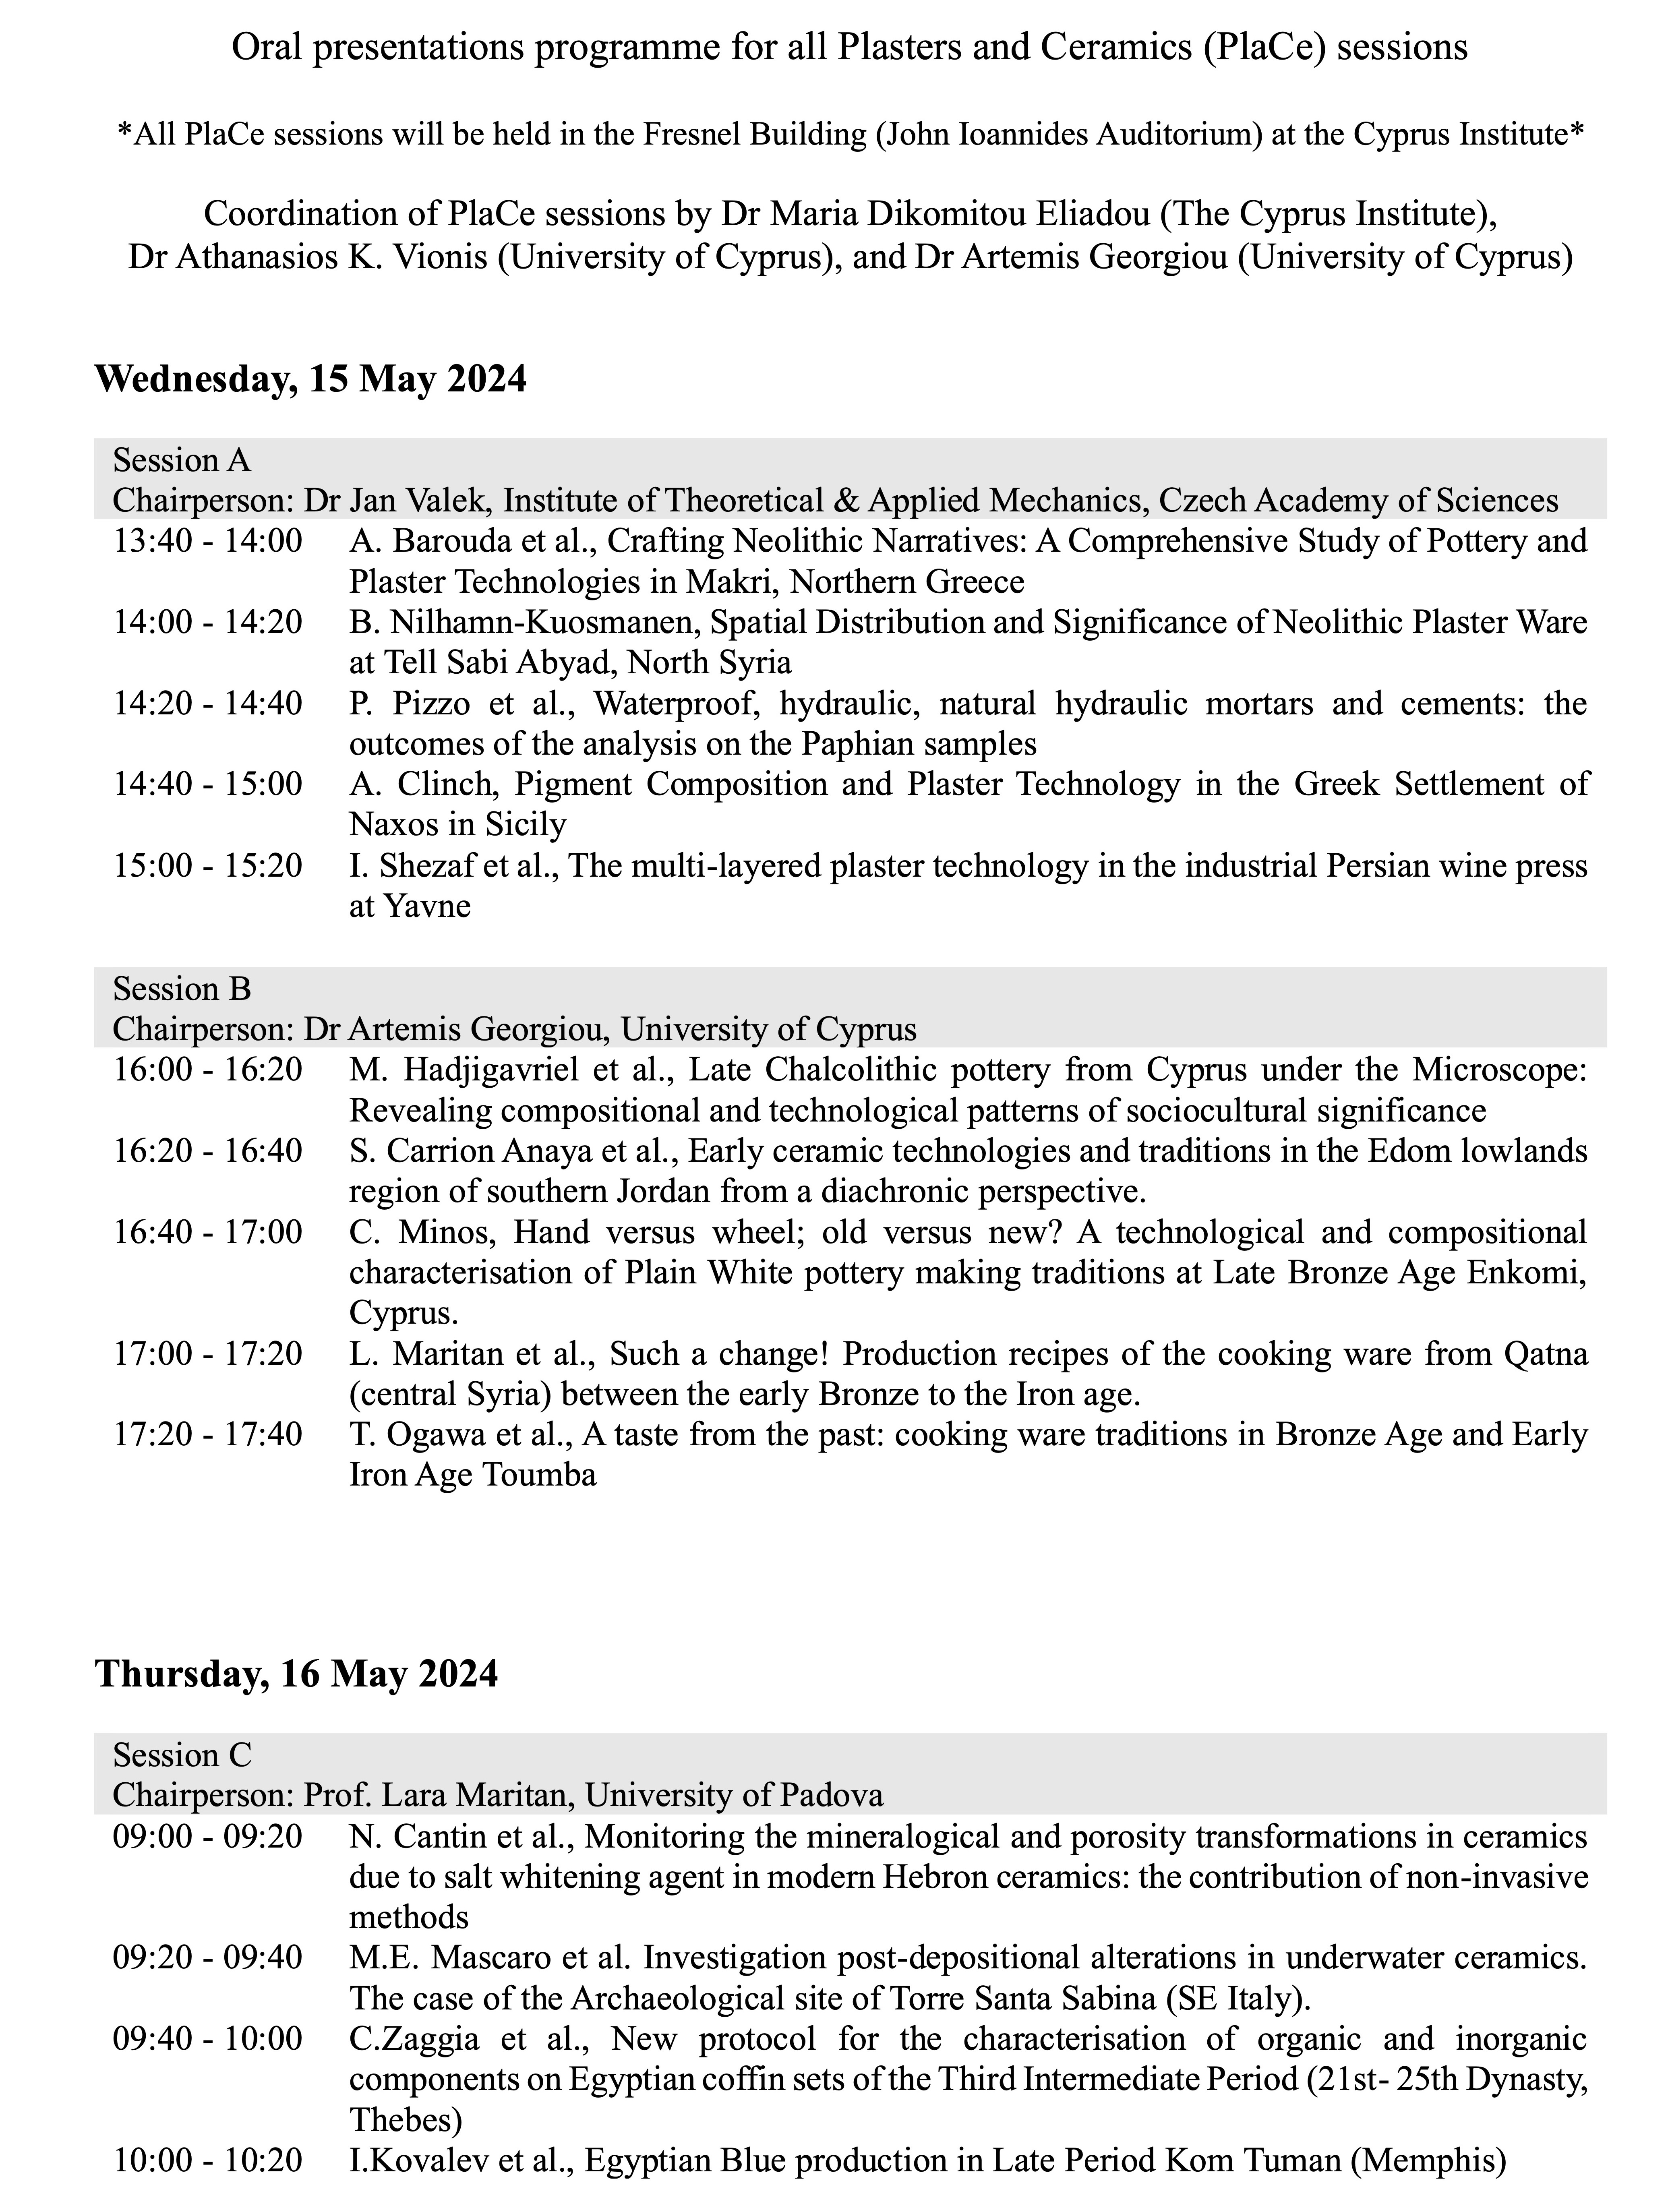 PlaCe programme page 1